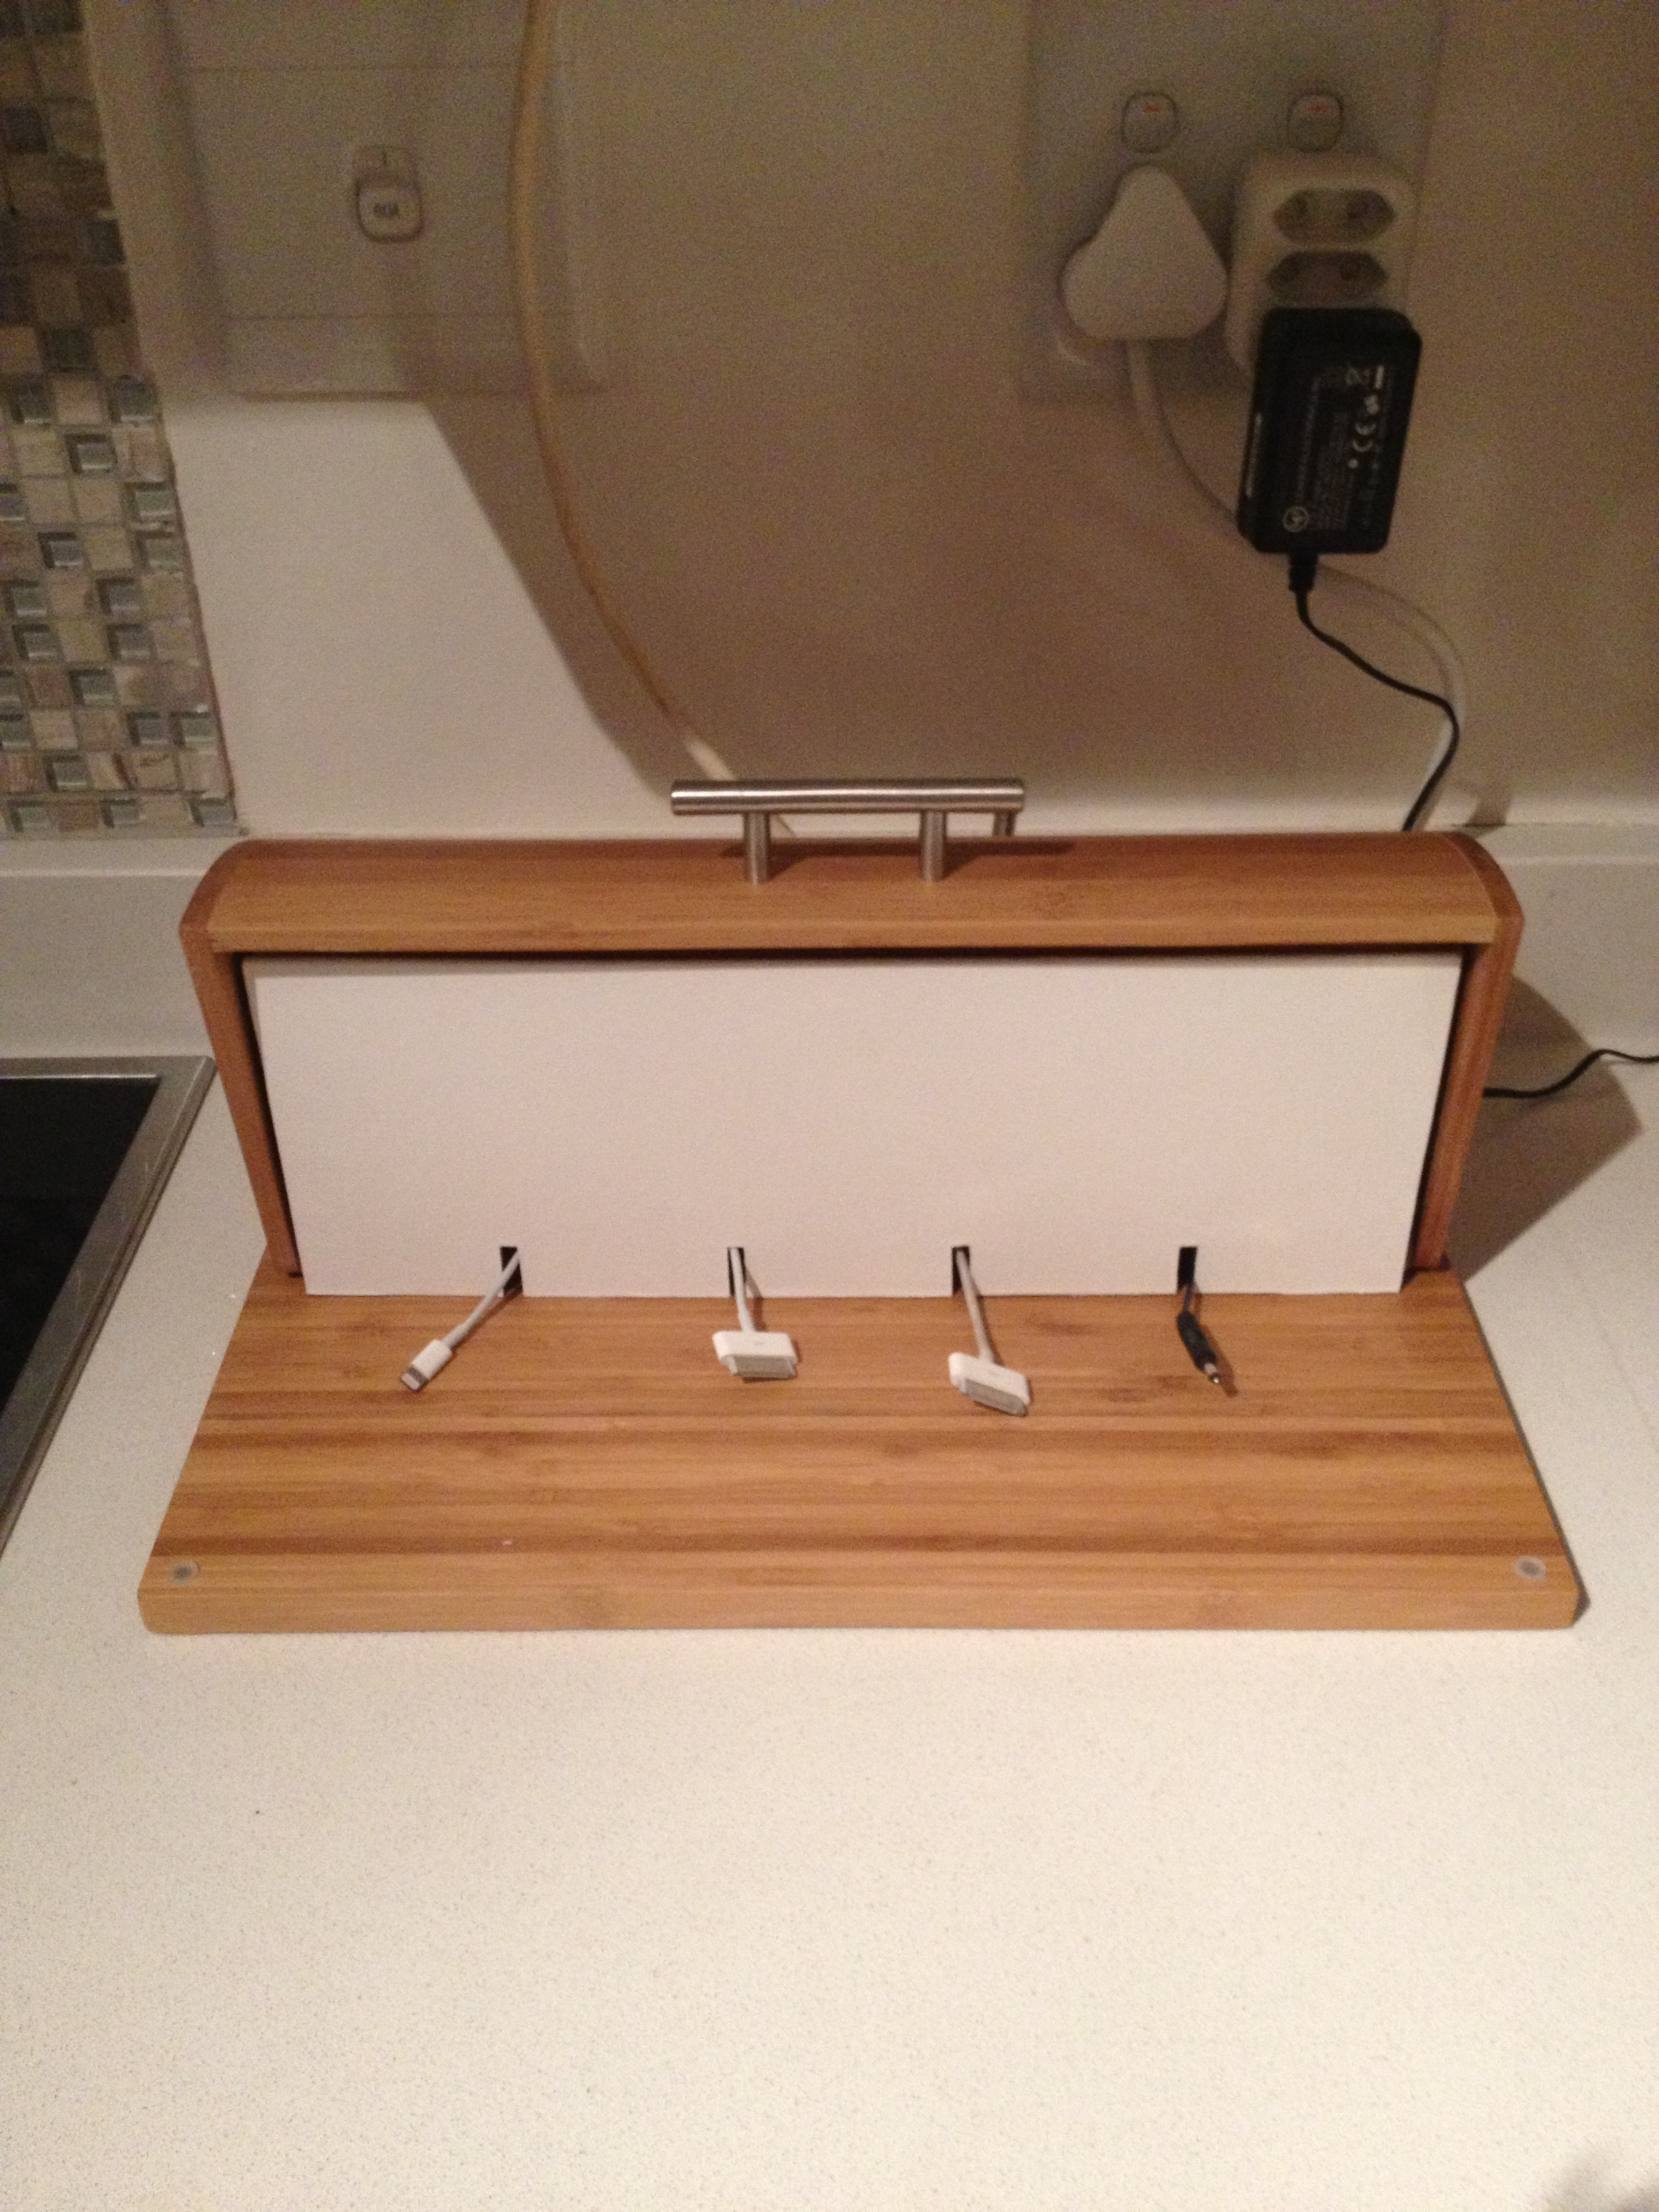 Best ideas about Charging Station DIY
. Save or Pin DIY Charging Station Now.